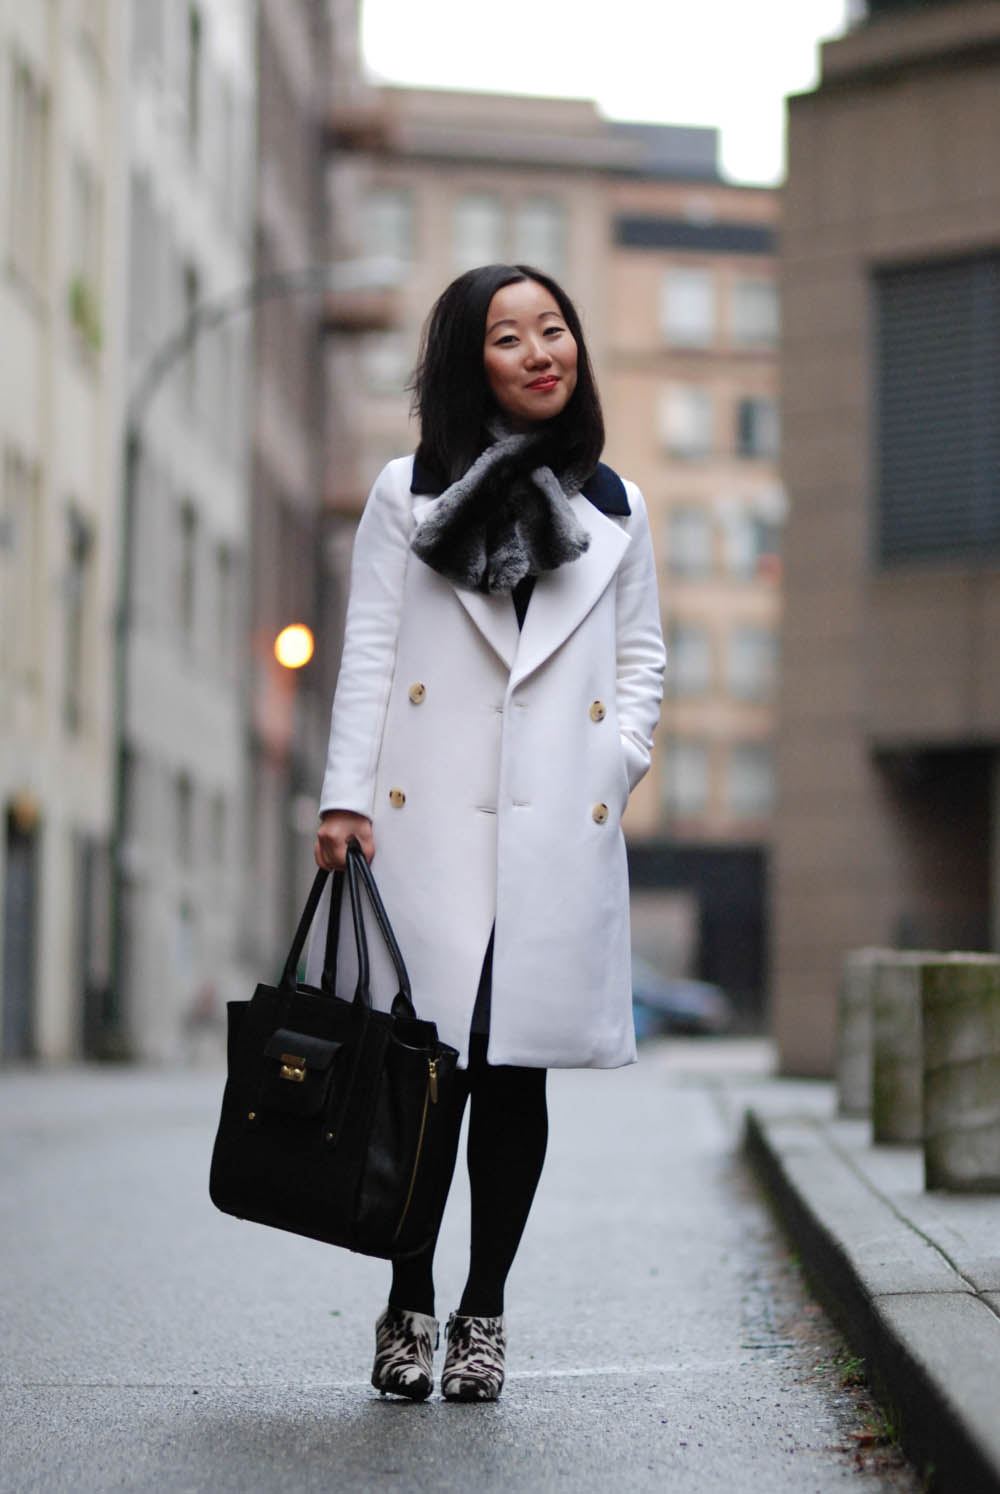 Wear to work - J. Crew topcoat with Theory leather and wool dress